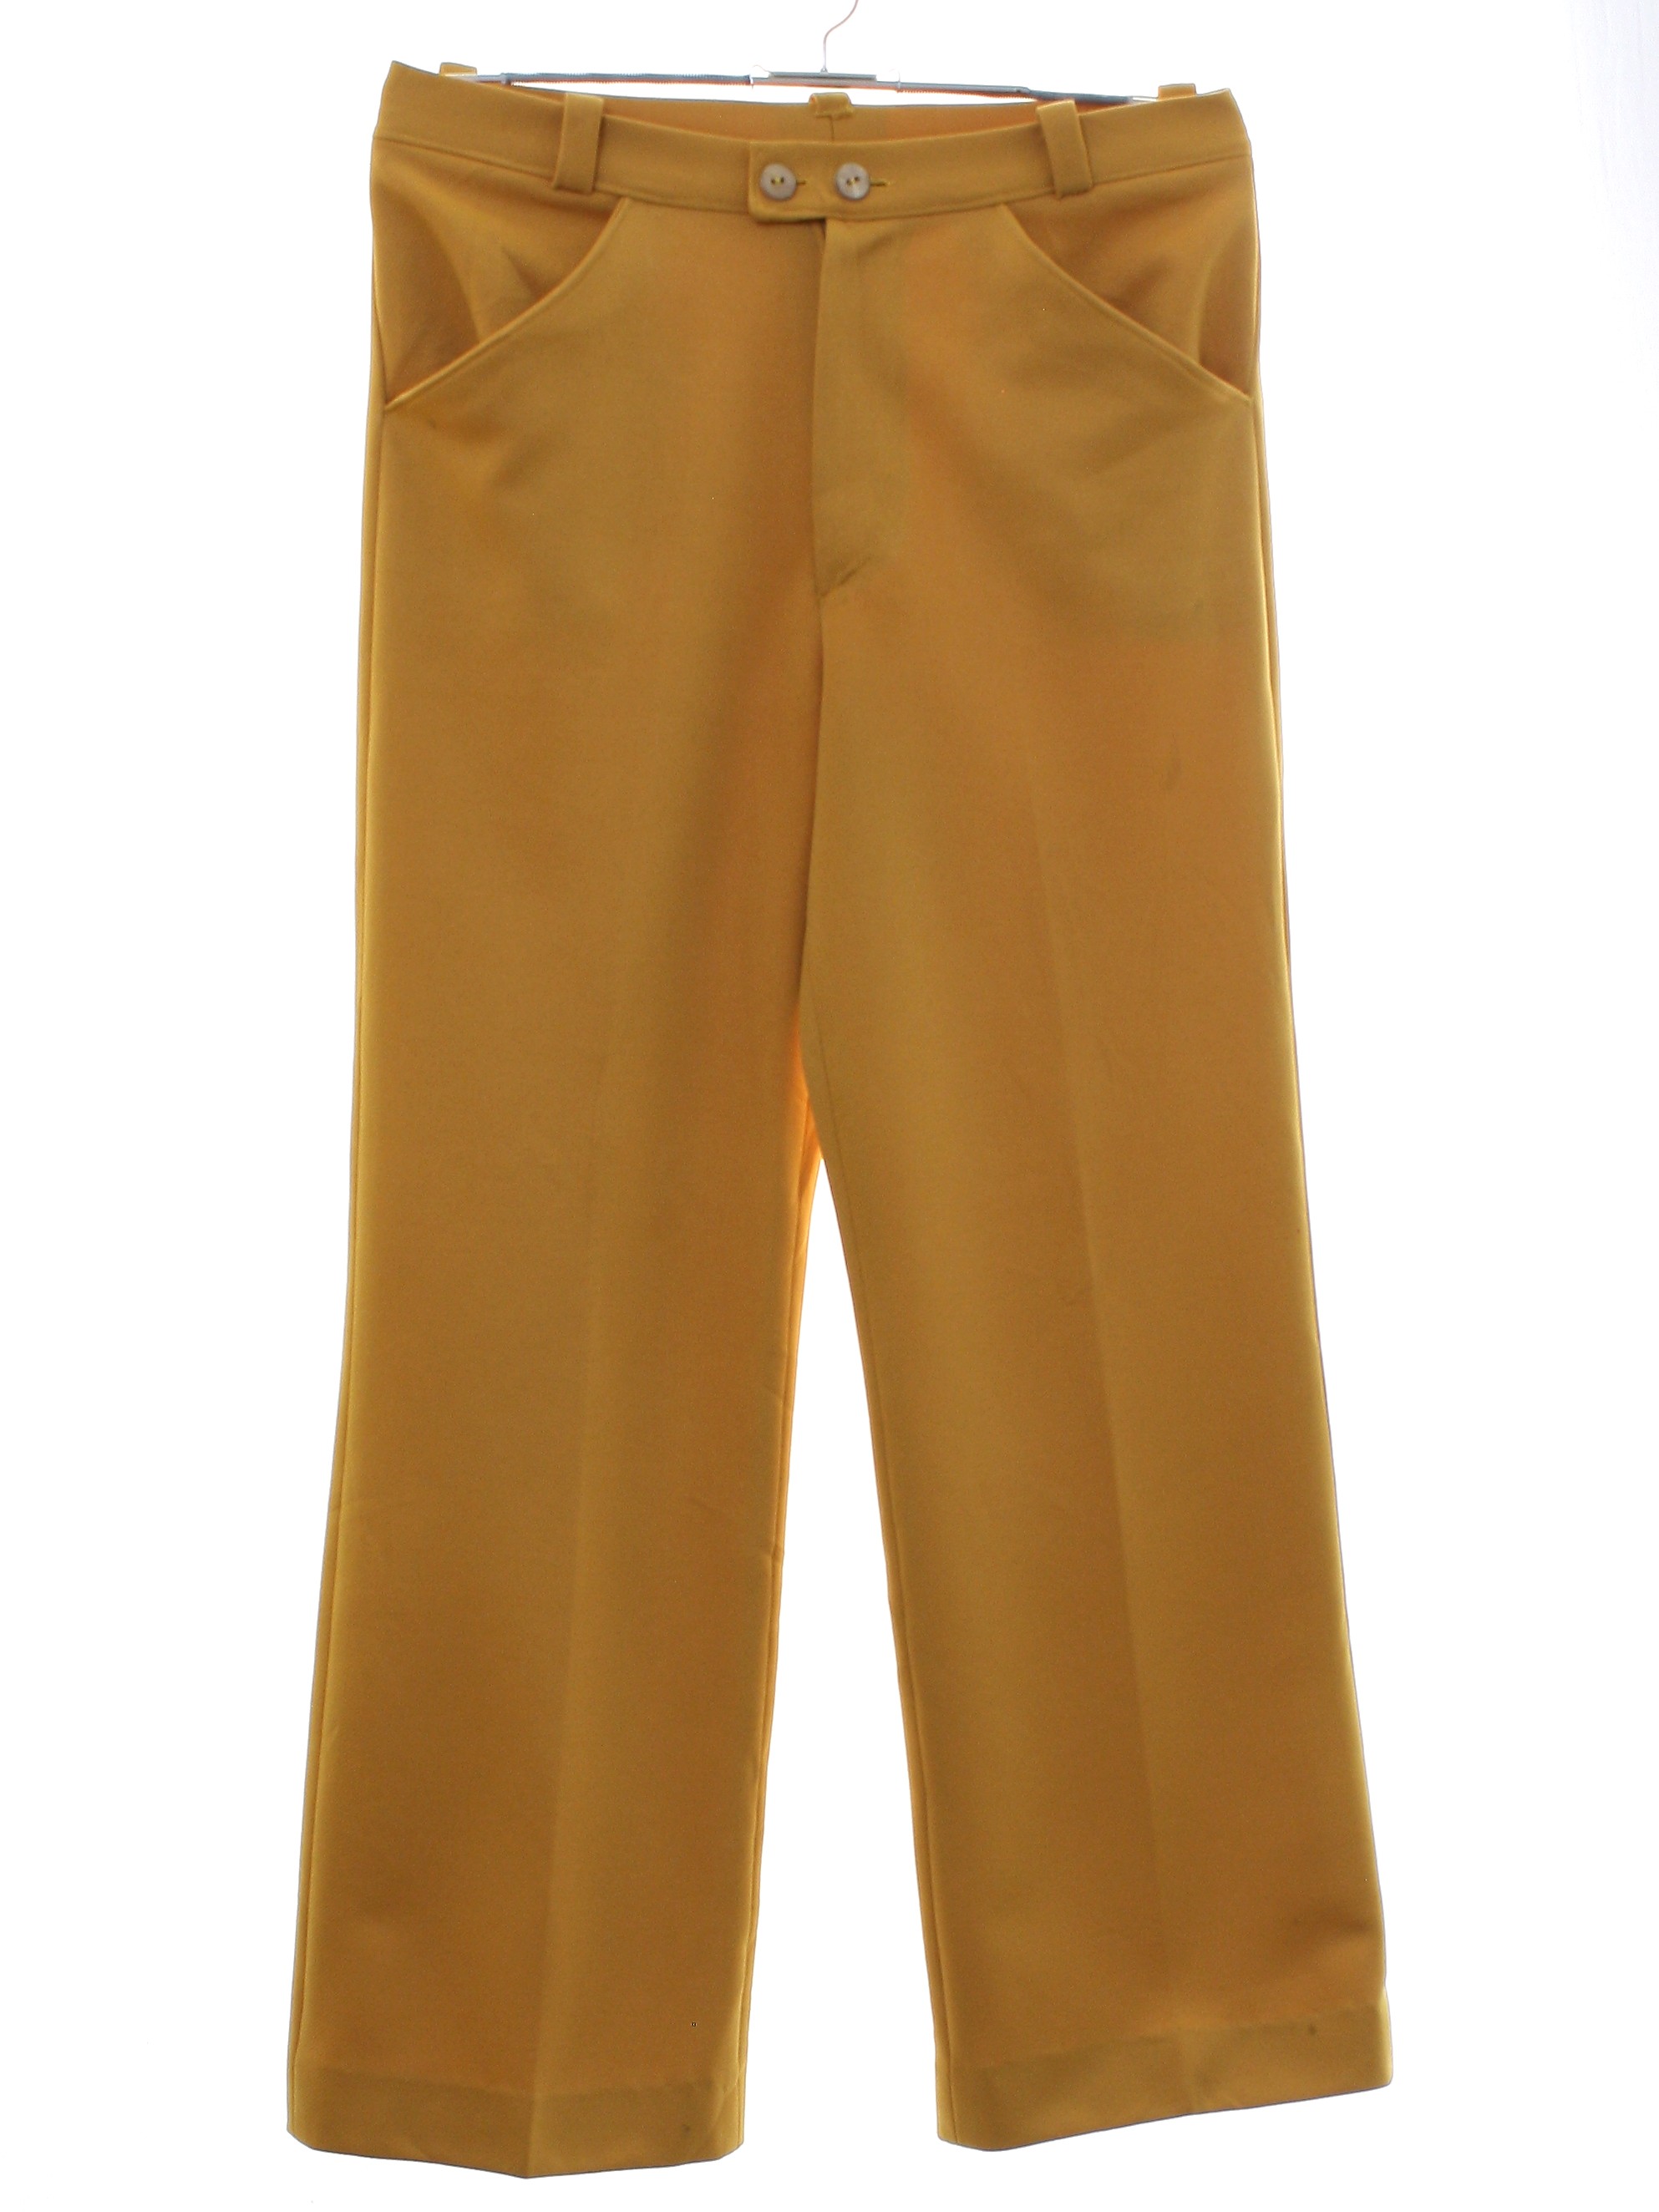 1970's Pants (Home Sewn): 70s -Home Sewn- Mens harvest gold solid ...